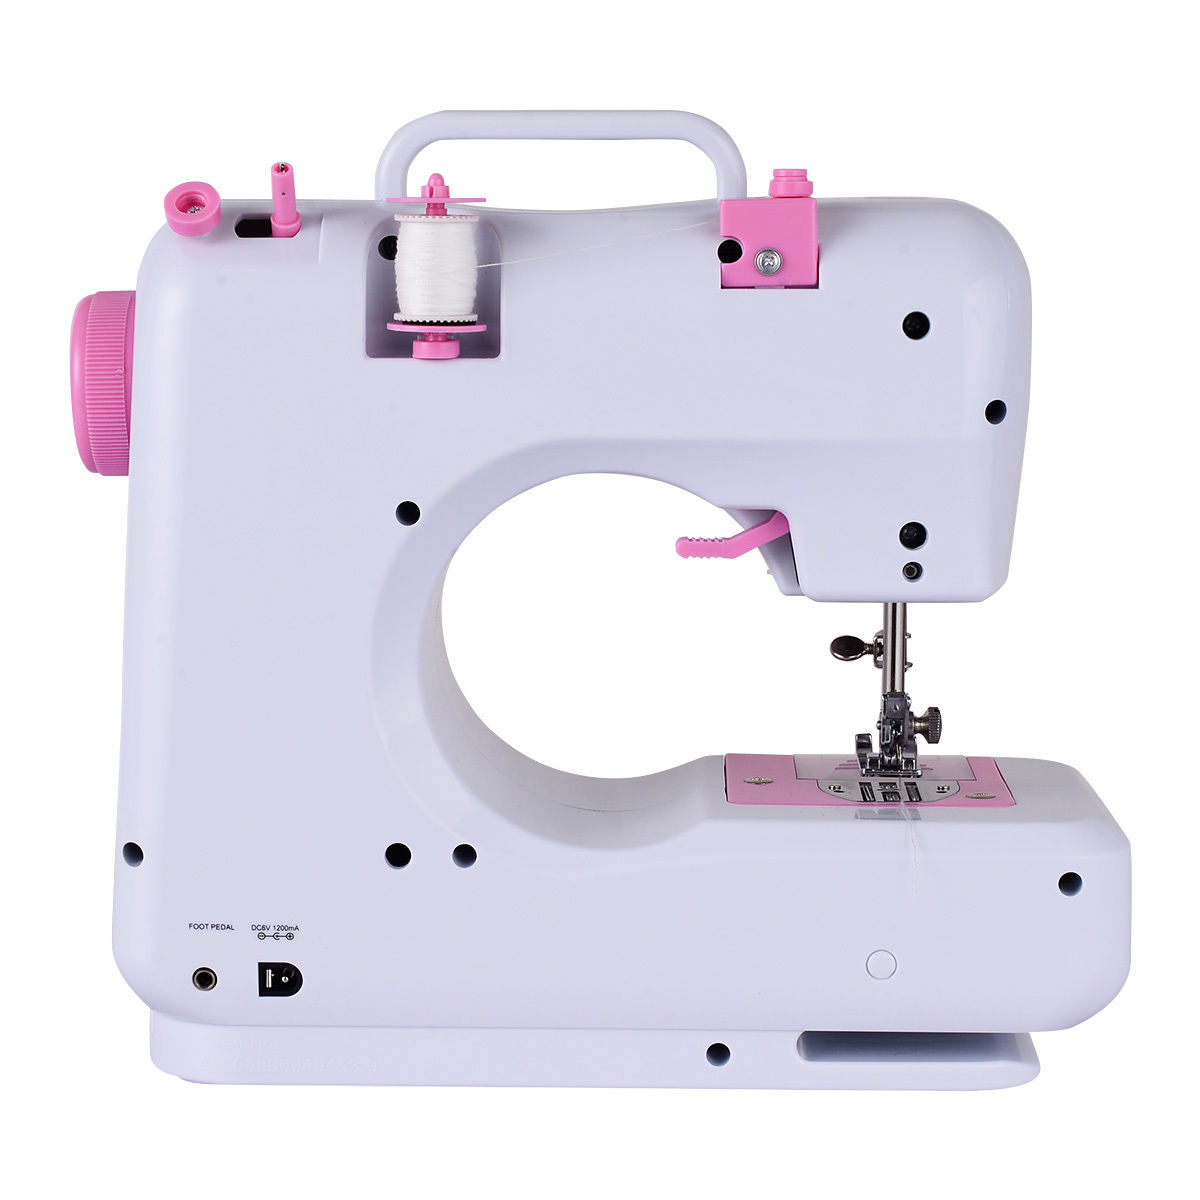 Costway Sewing Machine Free-Arm Crafting Mending Machine with 12 Built-In Stitched White - image 4 of 10